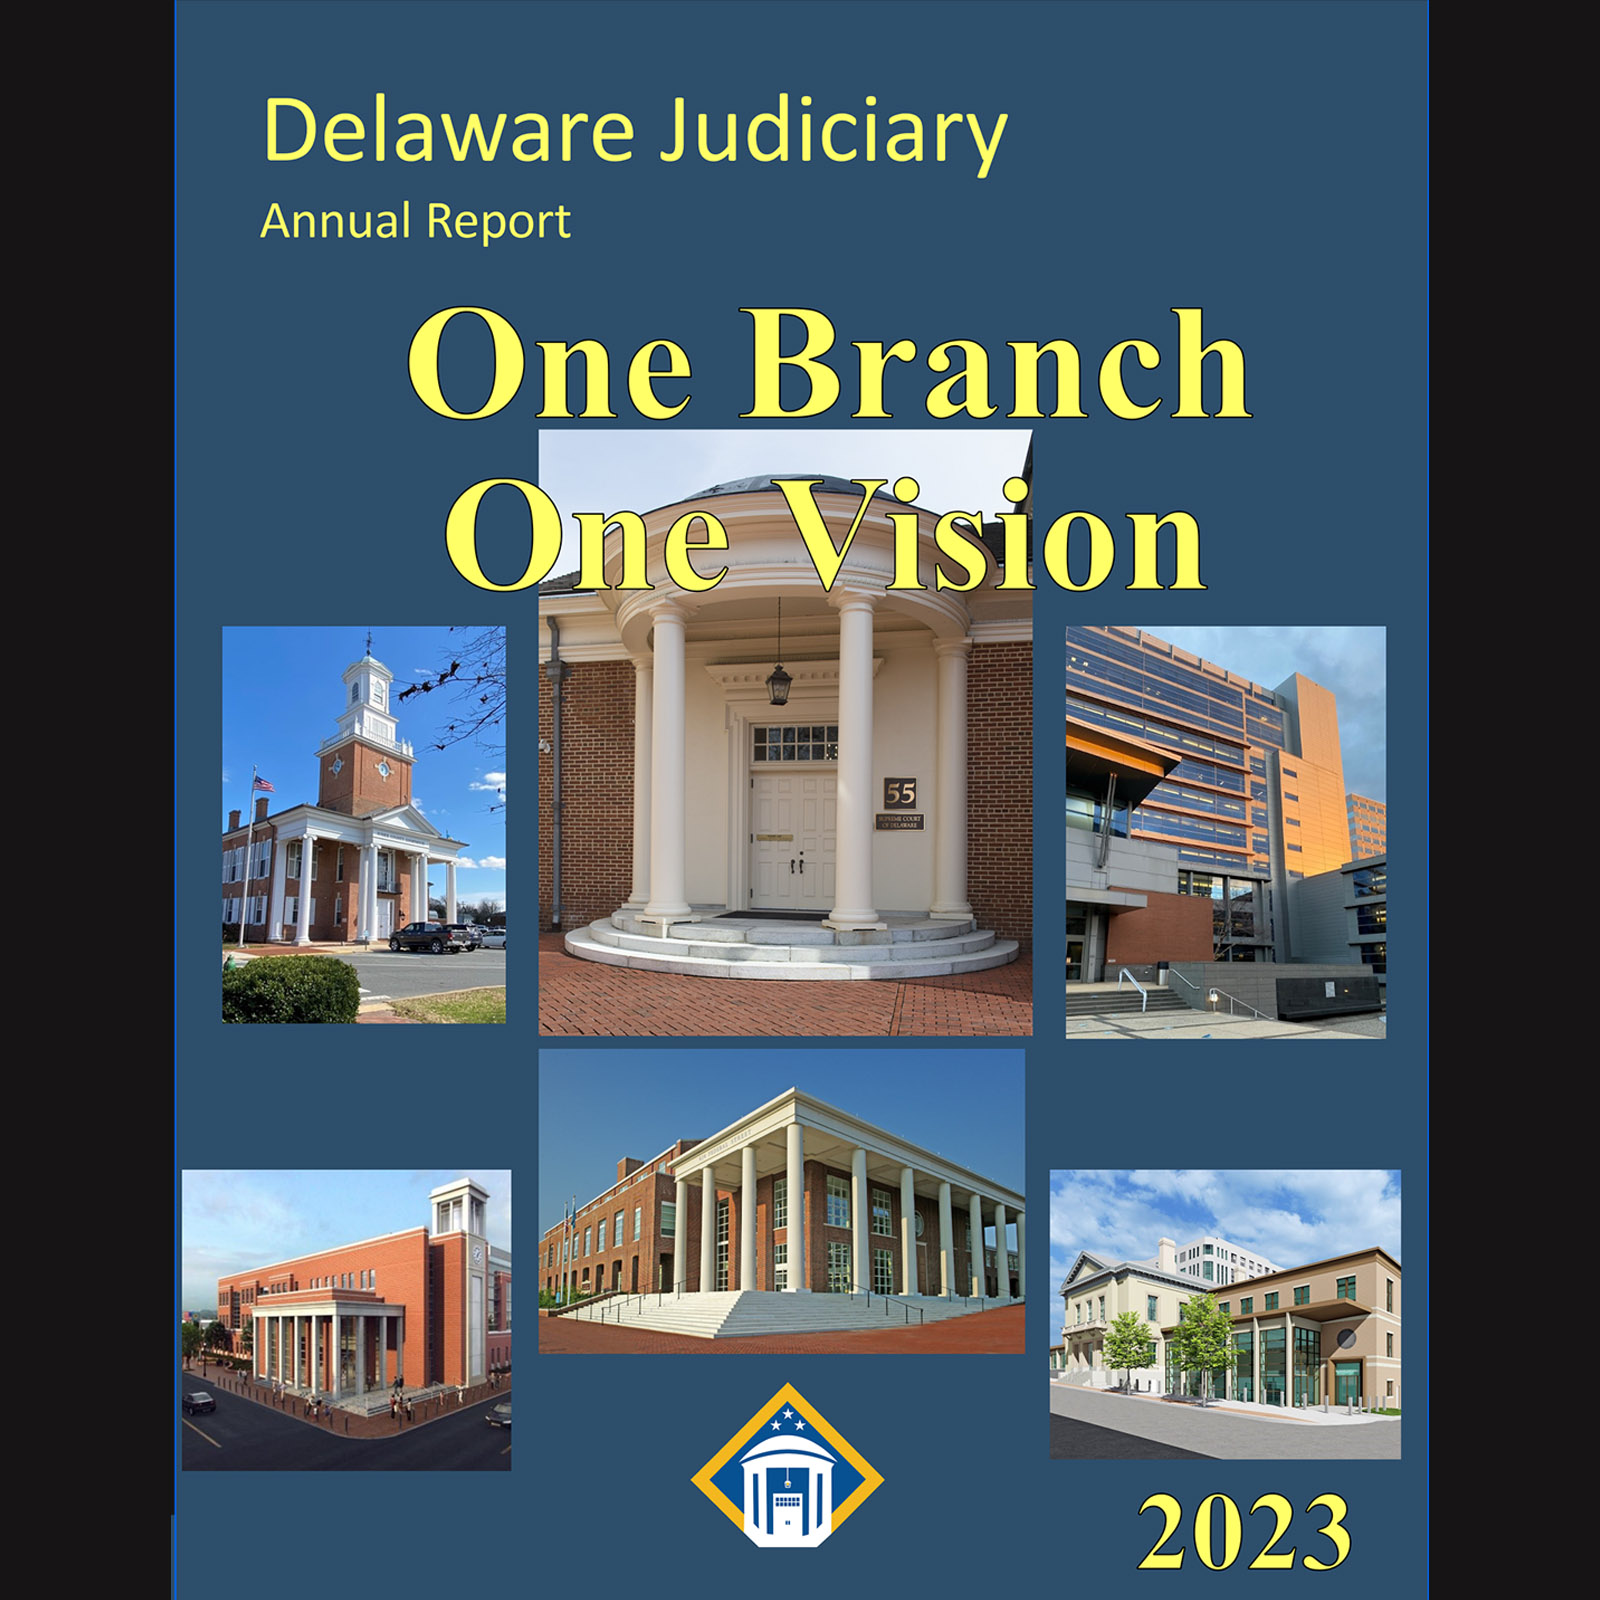 The Delaware Judiciary’s 2023 Annual Report is now available